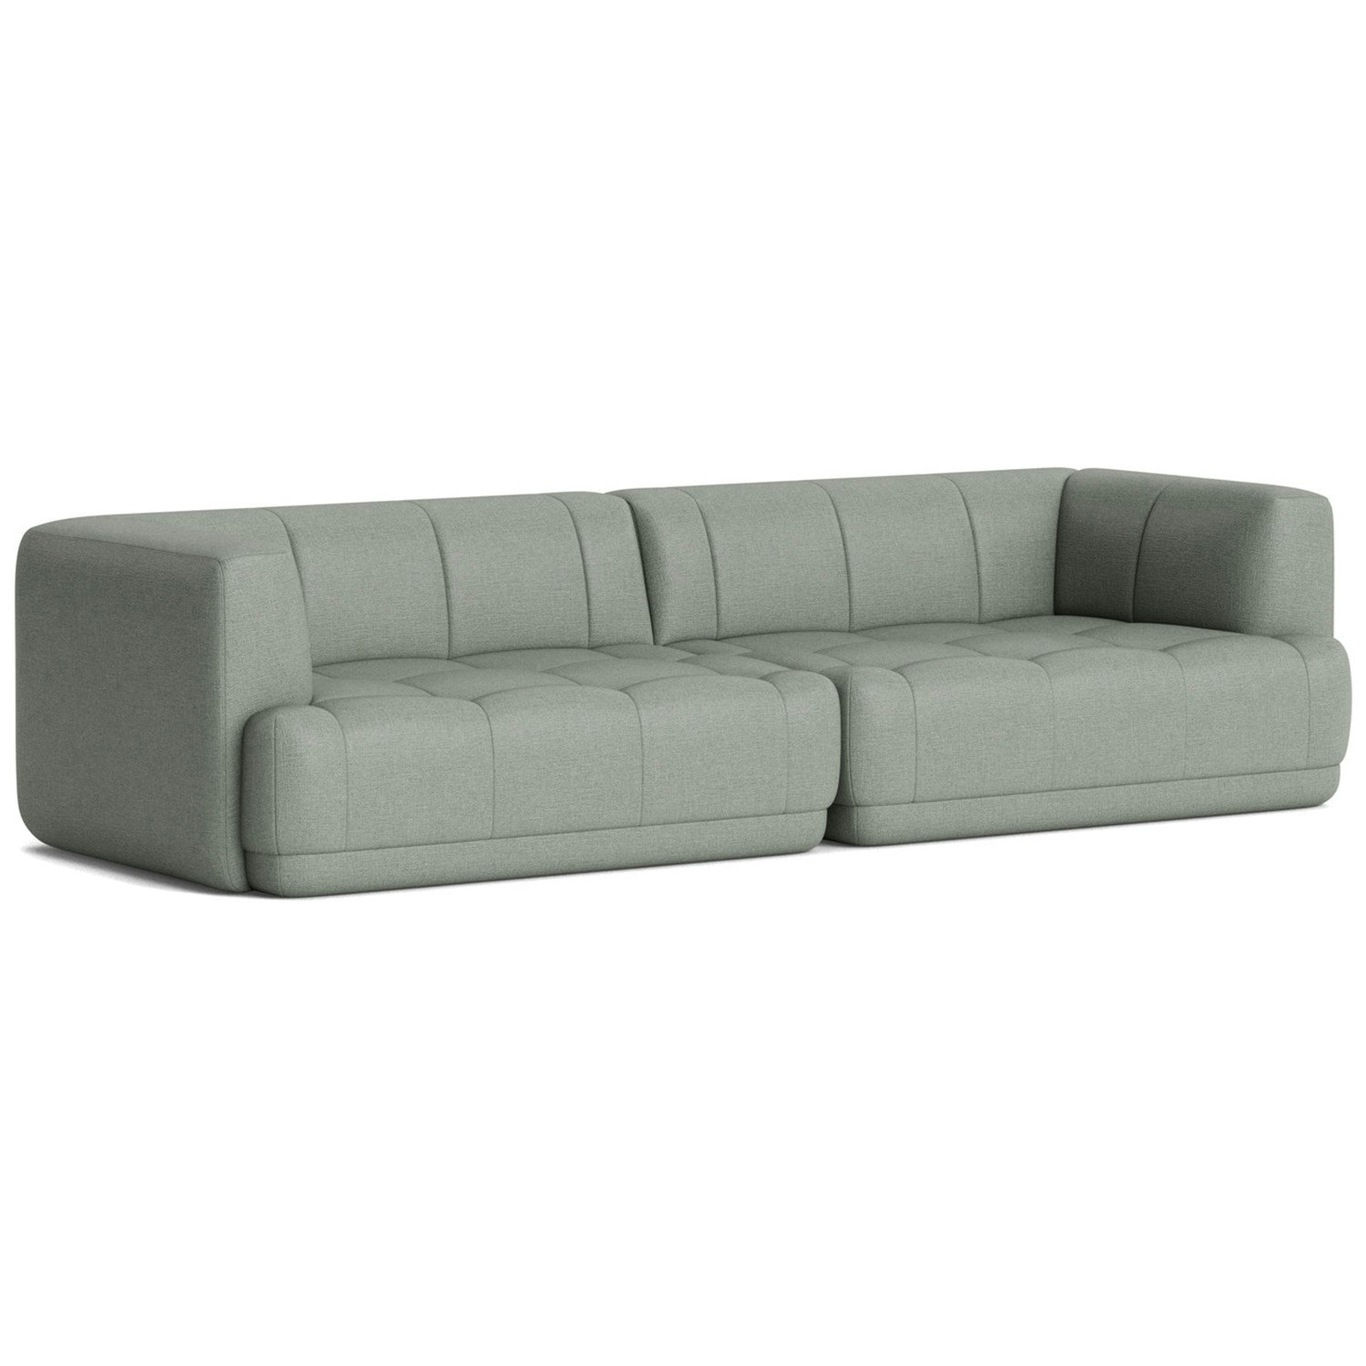 Quilton 3-Seater Sofa Configuration 1, Roden 08